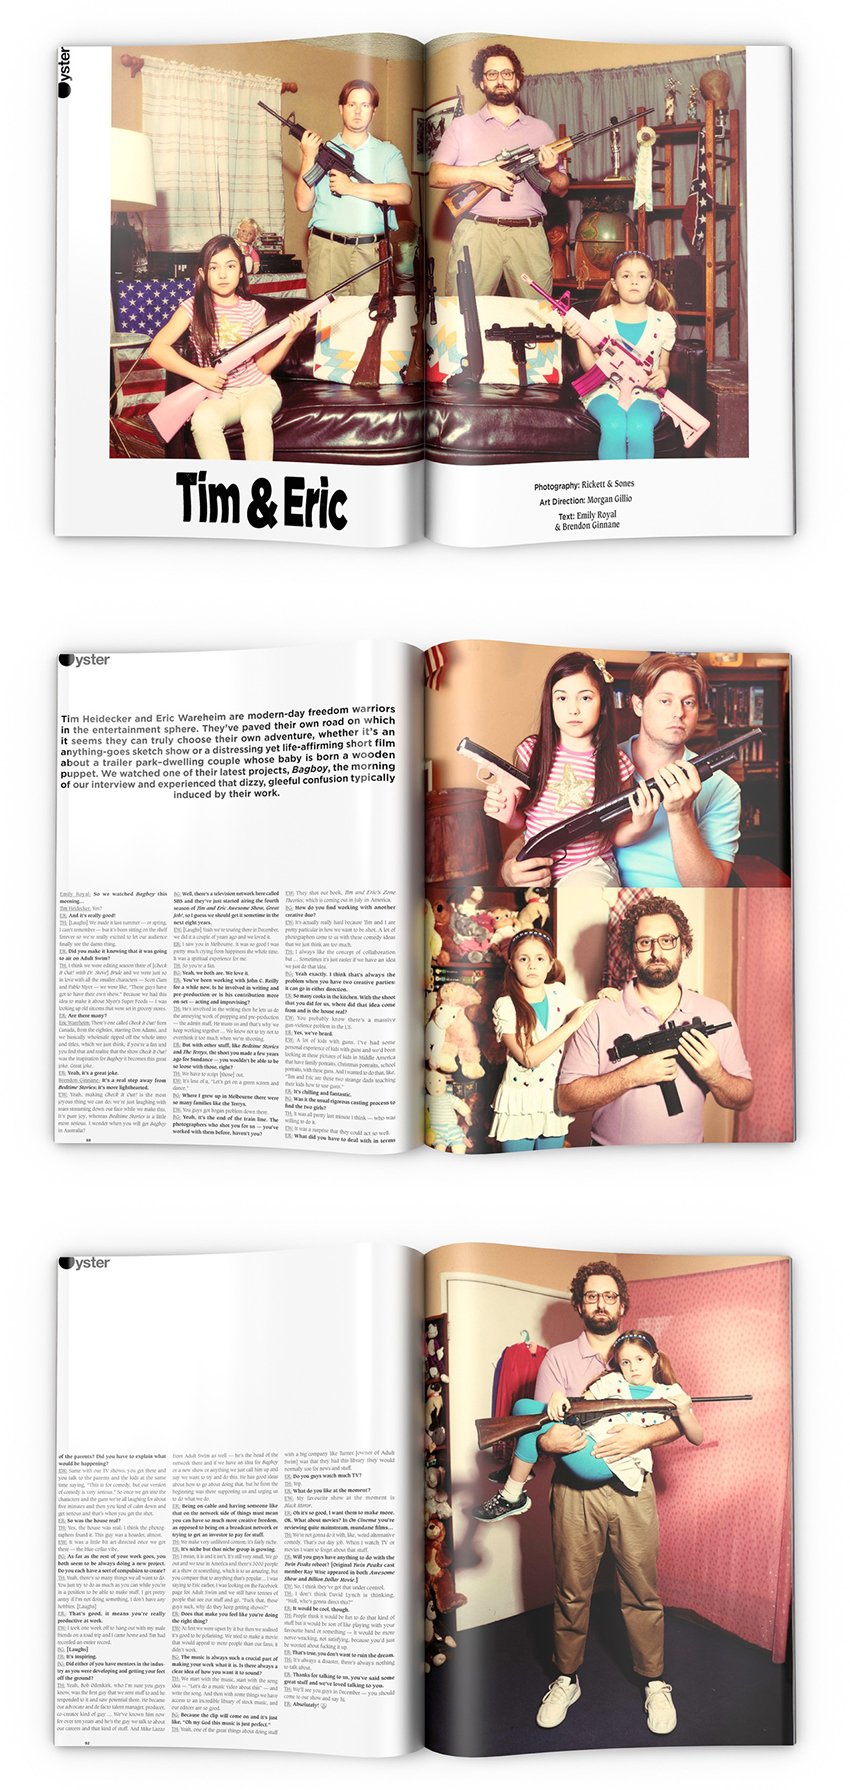 Tearsheets from a husband and wife creative team based in Los Angeles who direct and photograph commercials, virals, print campaigns, and portraits: Rickett & Sones. 